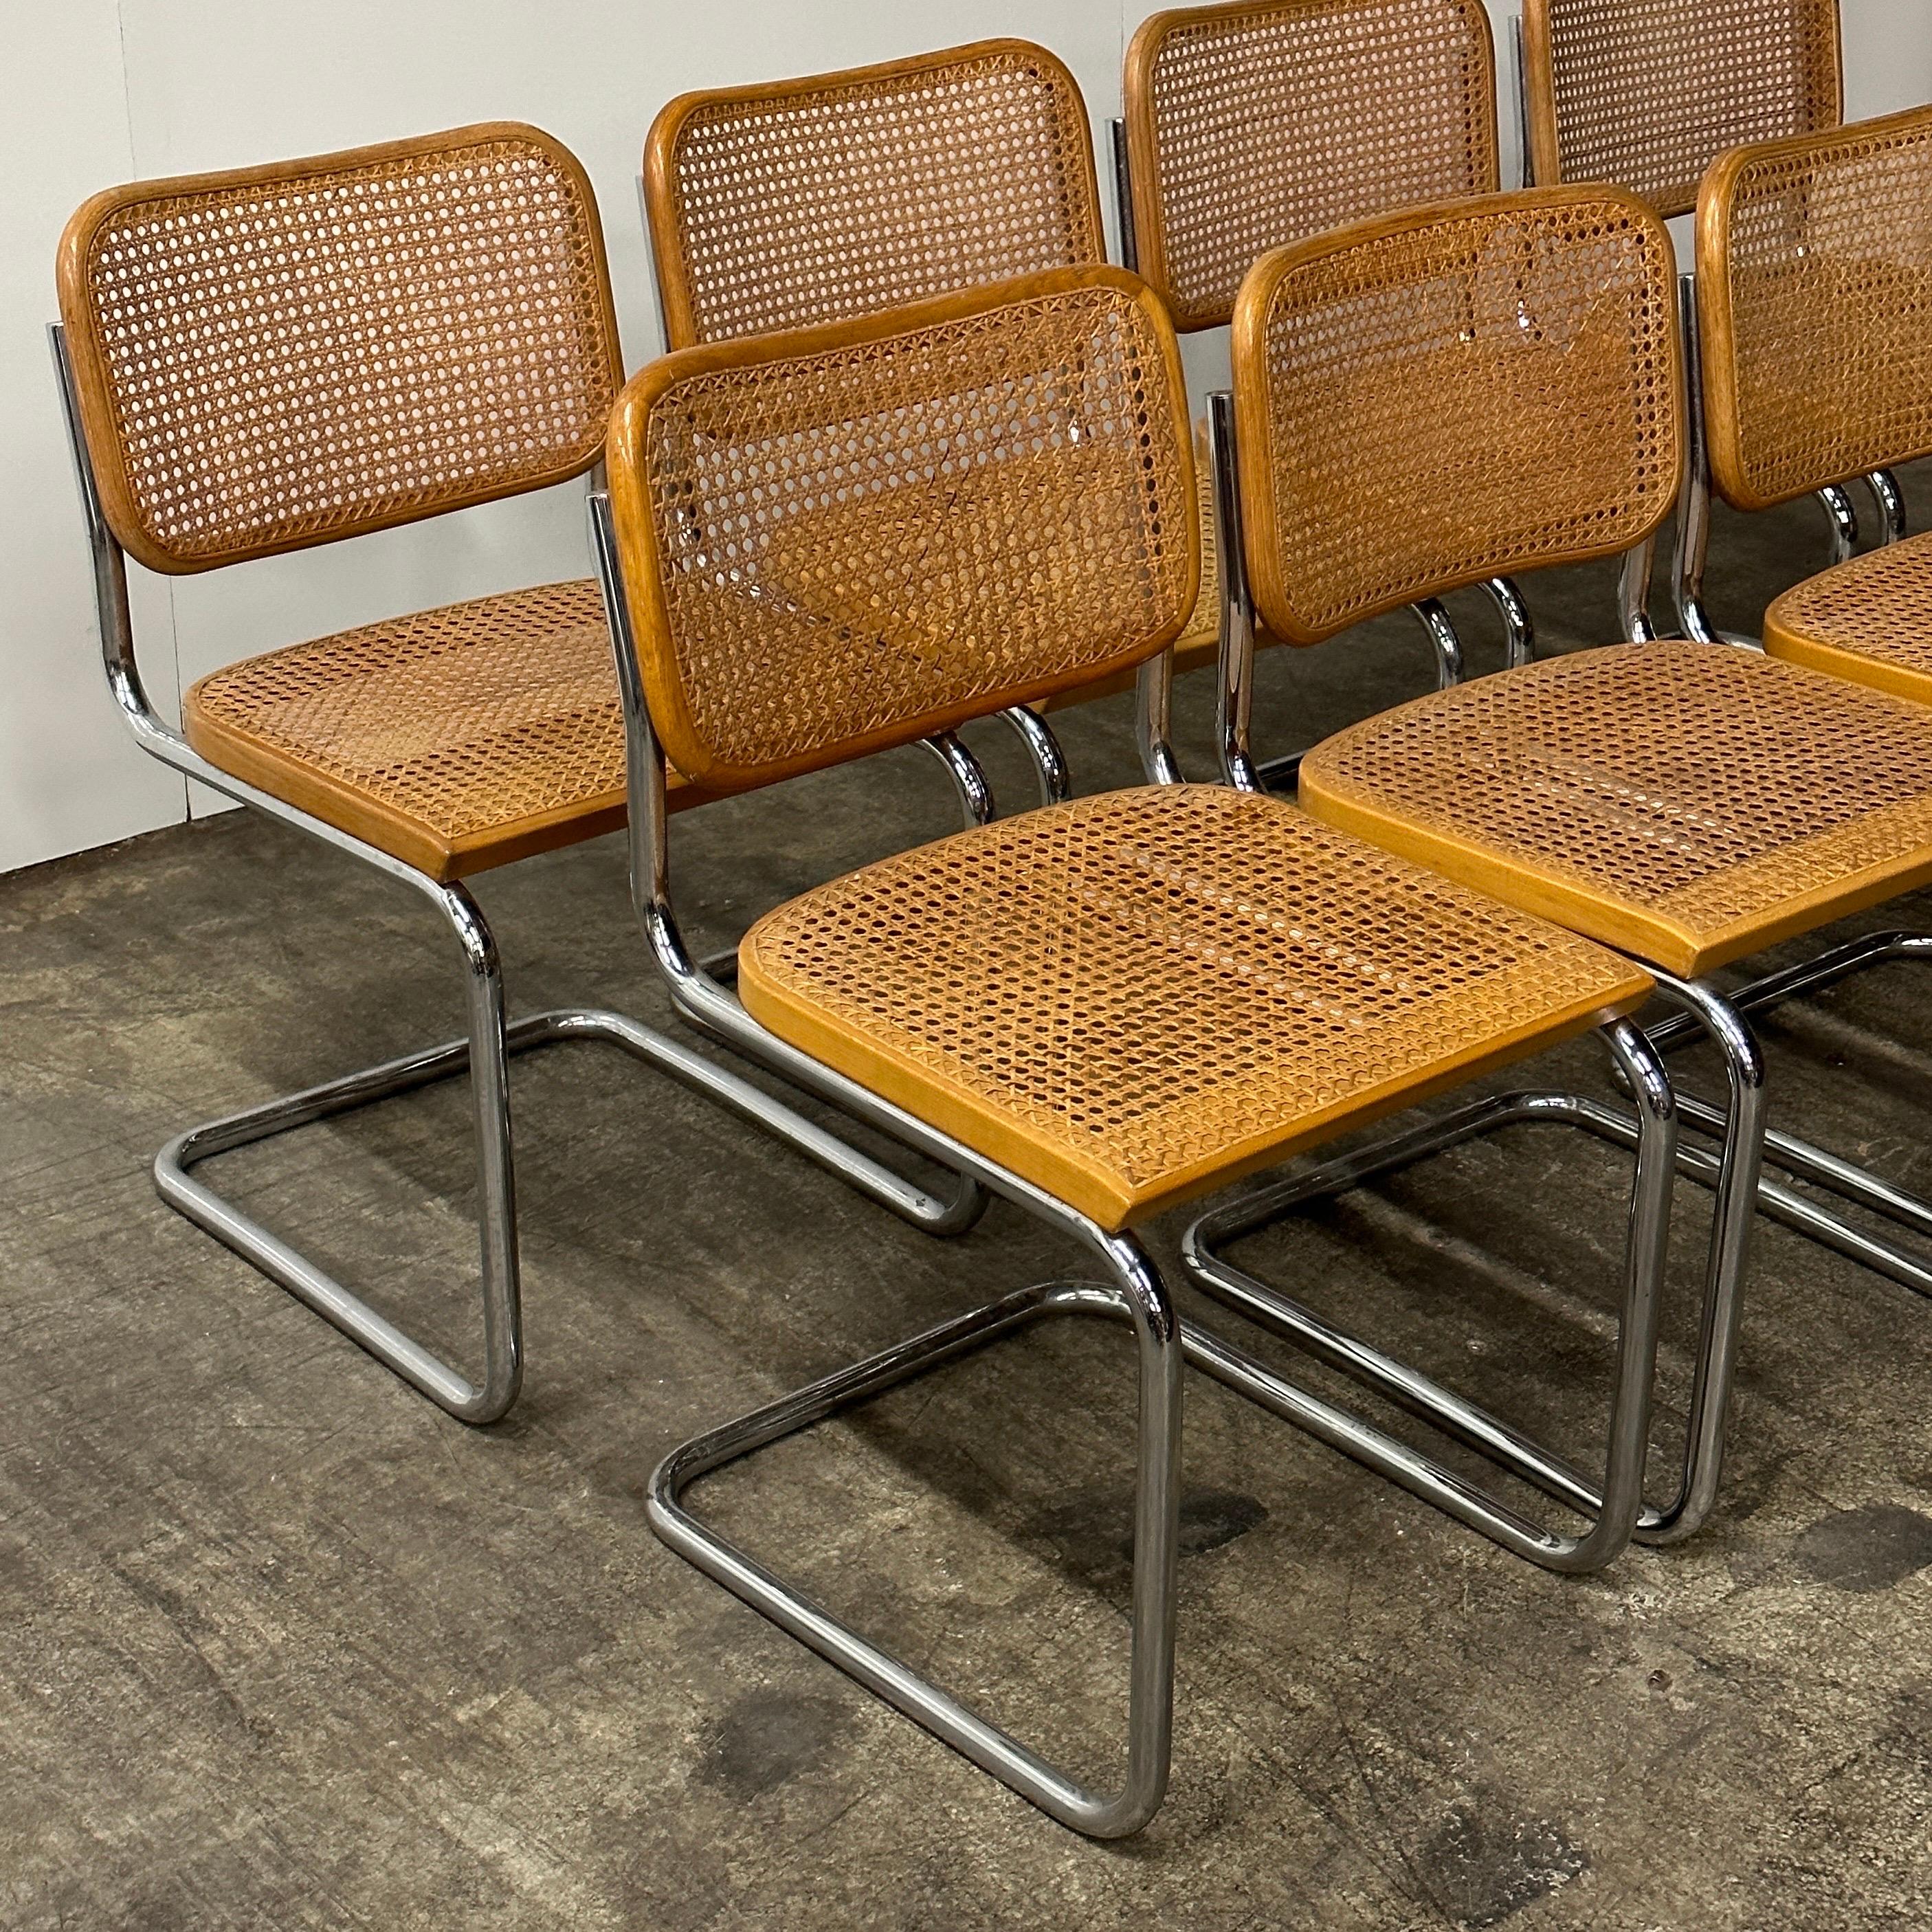 c. 1960s. Price is for the set. Contact us if you’d like to purchase a single item. These Cesca chairs are an original example of the armless B32 chair by Marcel Breuer. They are extremely rare in this condition, especially for a set of eight. These